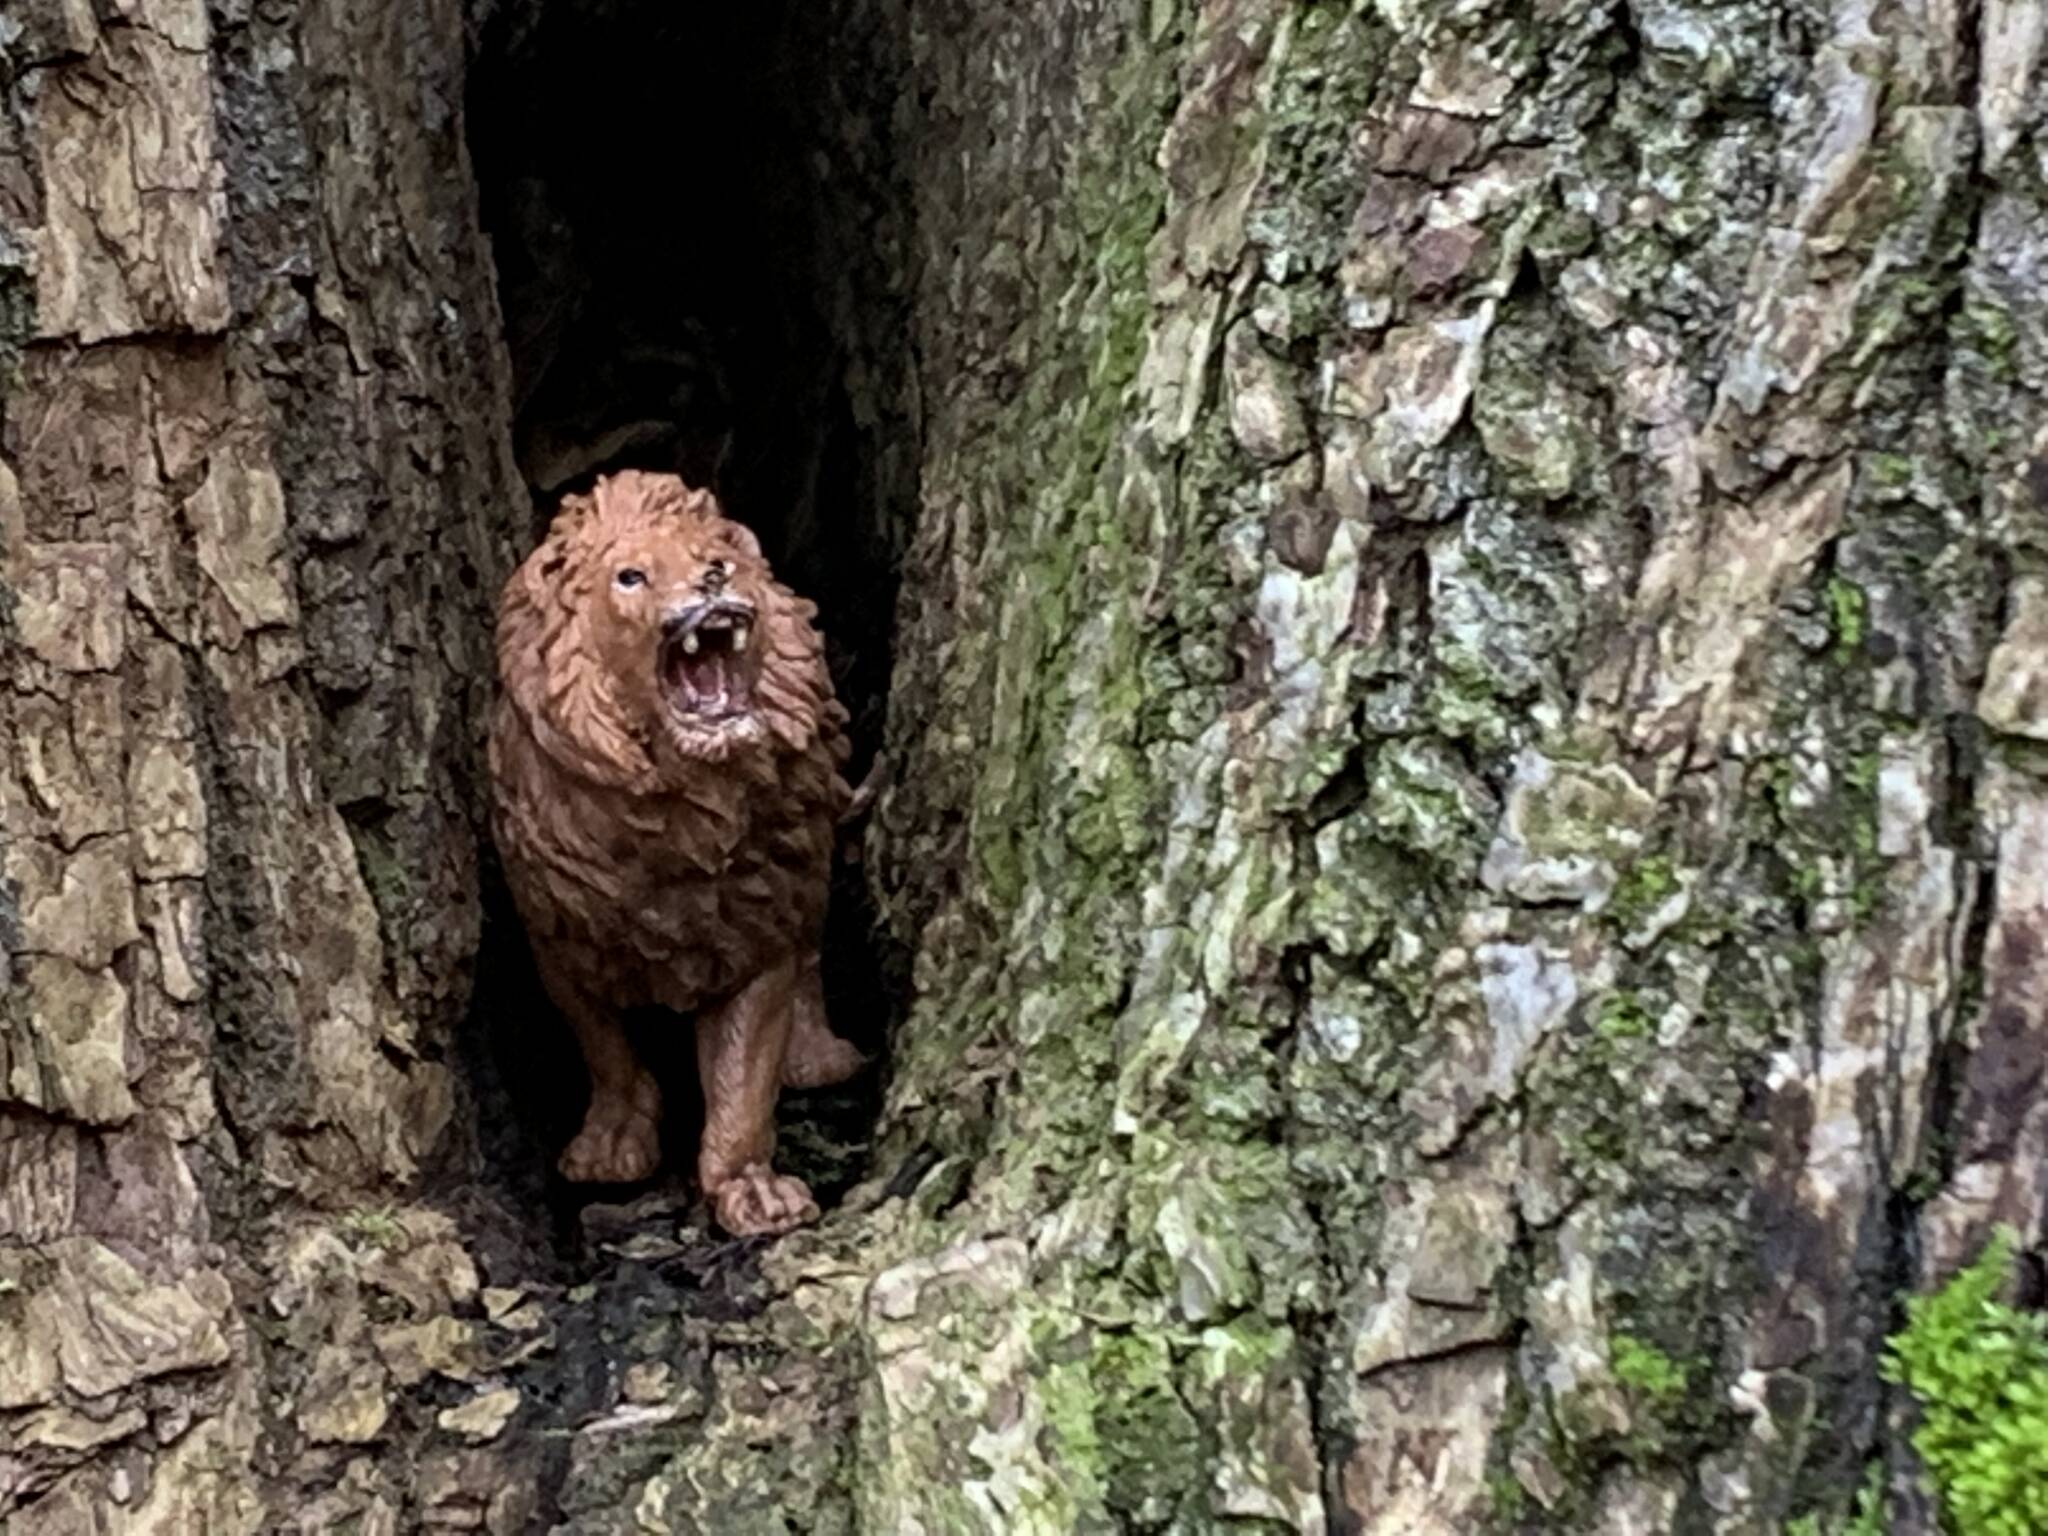 Greg Asimakoupoulos writes: “Seeing the tiny toy lion in an opening in that tree trunk reminded me that death does not have the final word in life.”